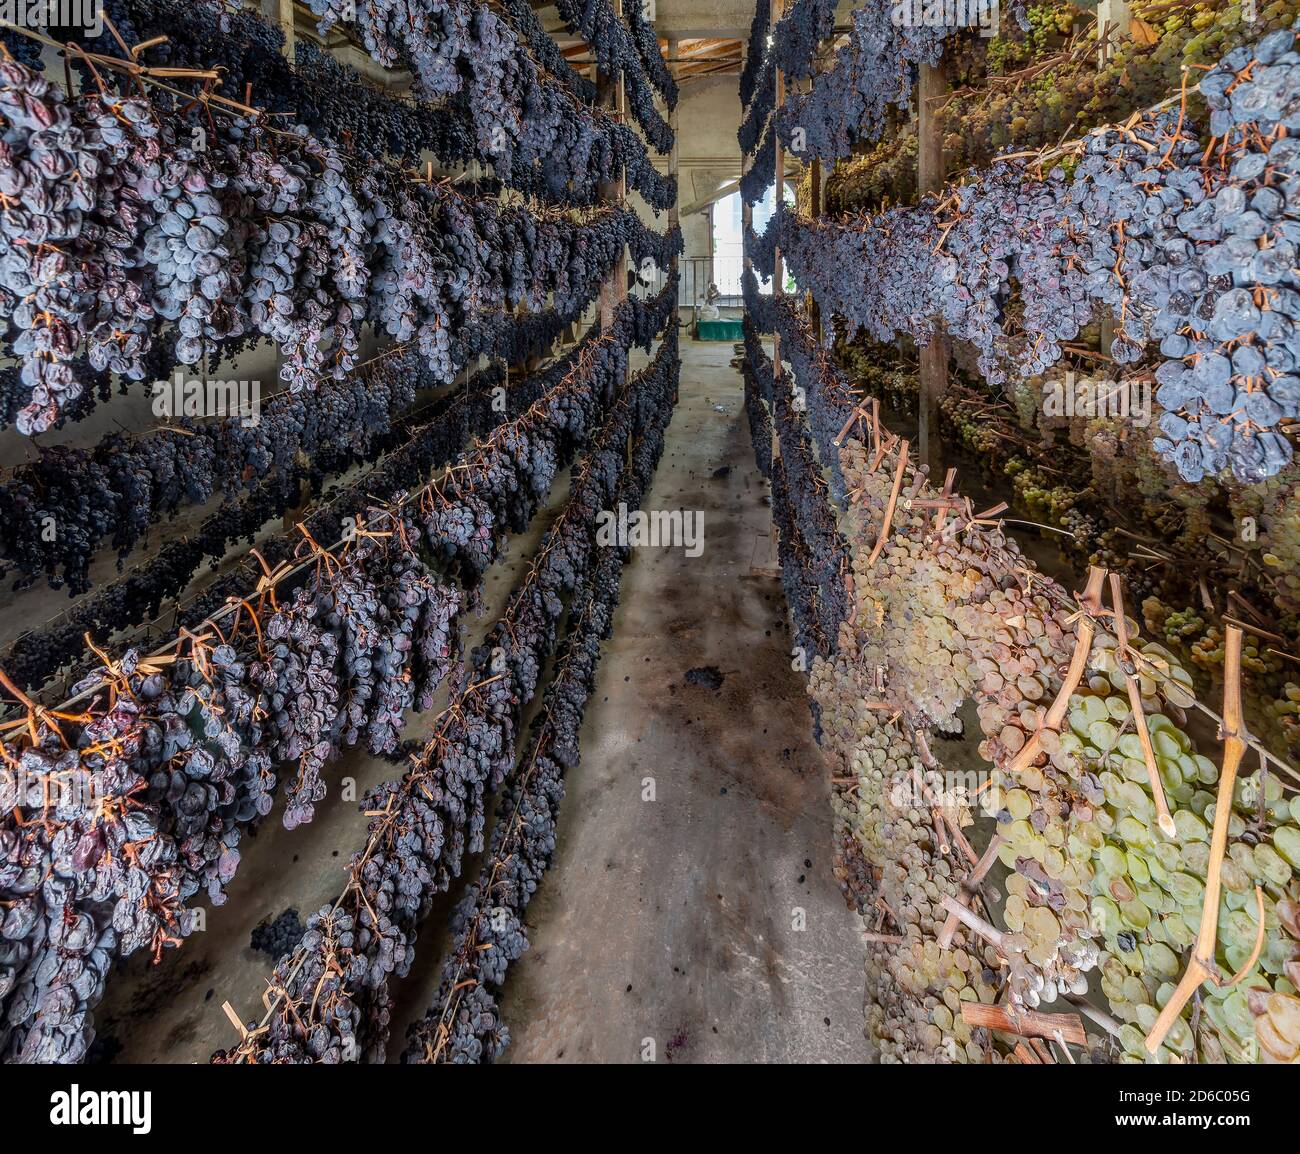 Bunches of black and white grapes are hung in various rows to wither, for the production of the famous vin santo wine, Tuscany, Italy Stock Photo